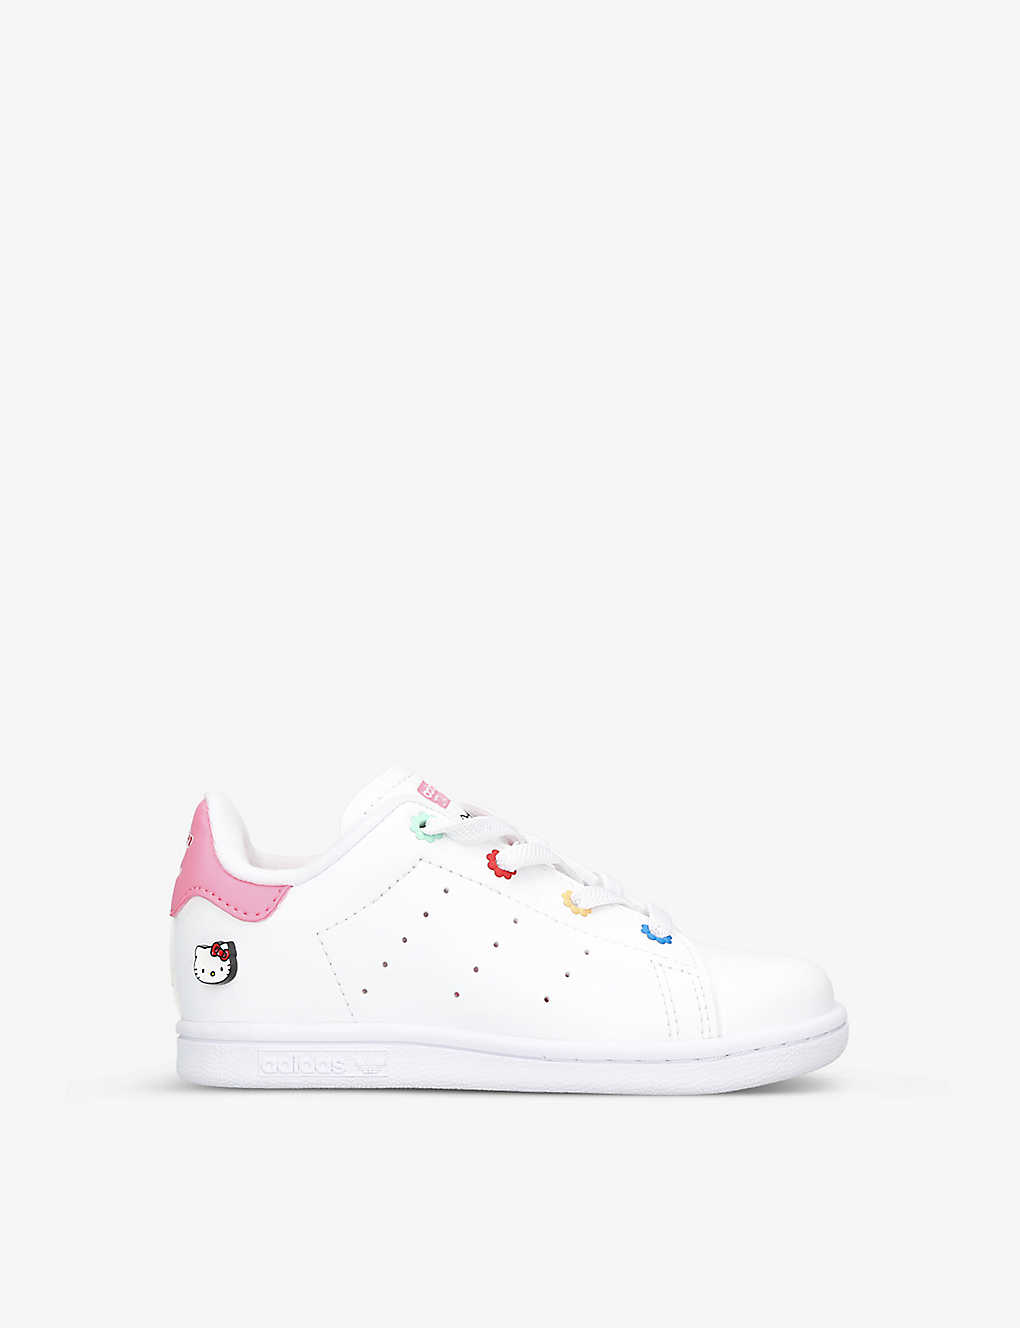 Adidas Originals Adidas Kids X Hello Kitty El I Sneakers In White/oth